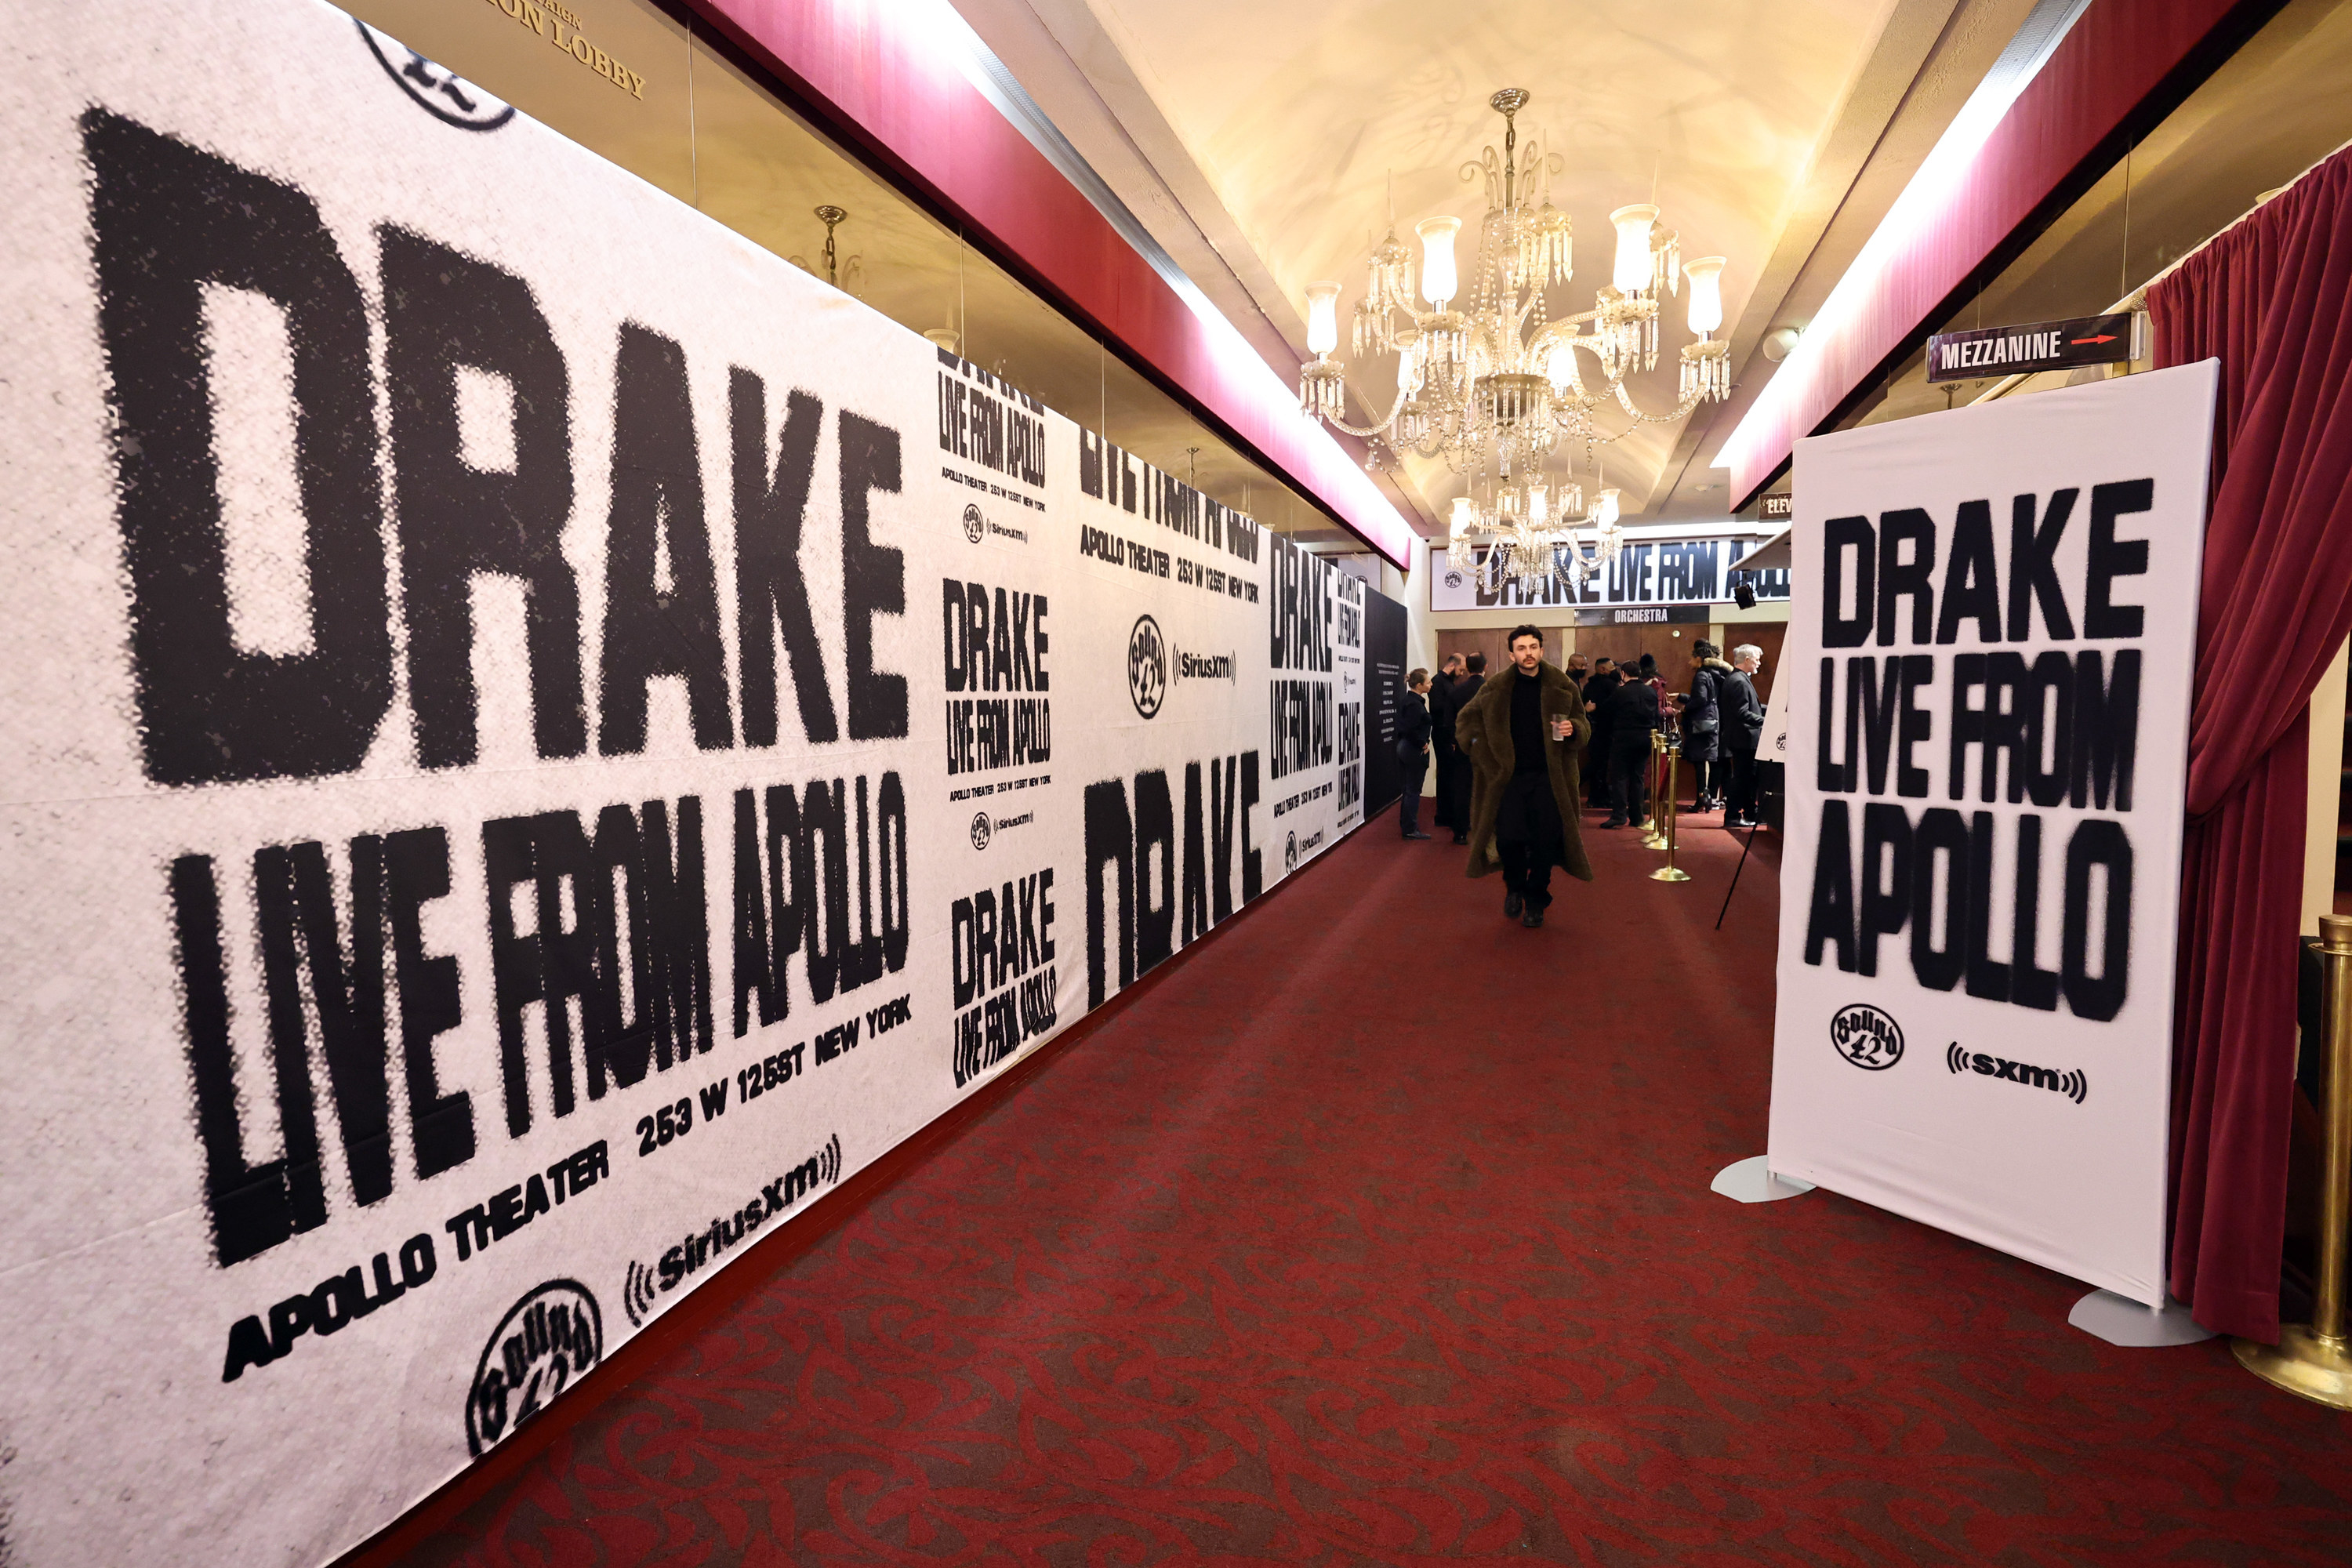 drake live from the apollo signs in the hallway of the venue